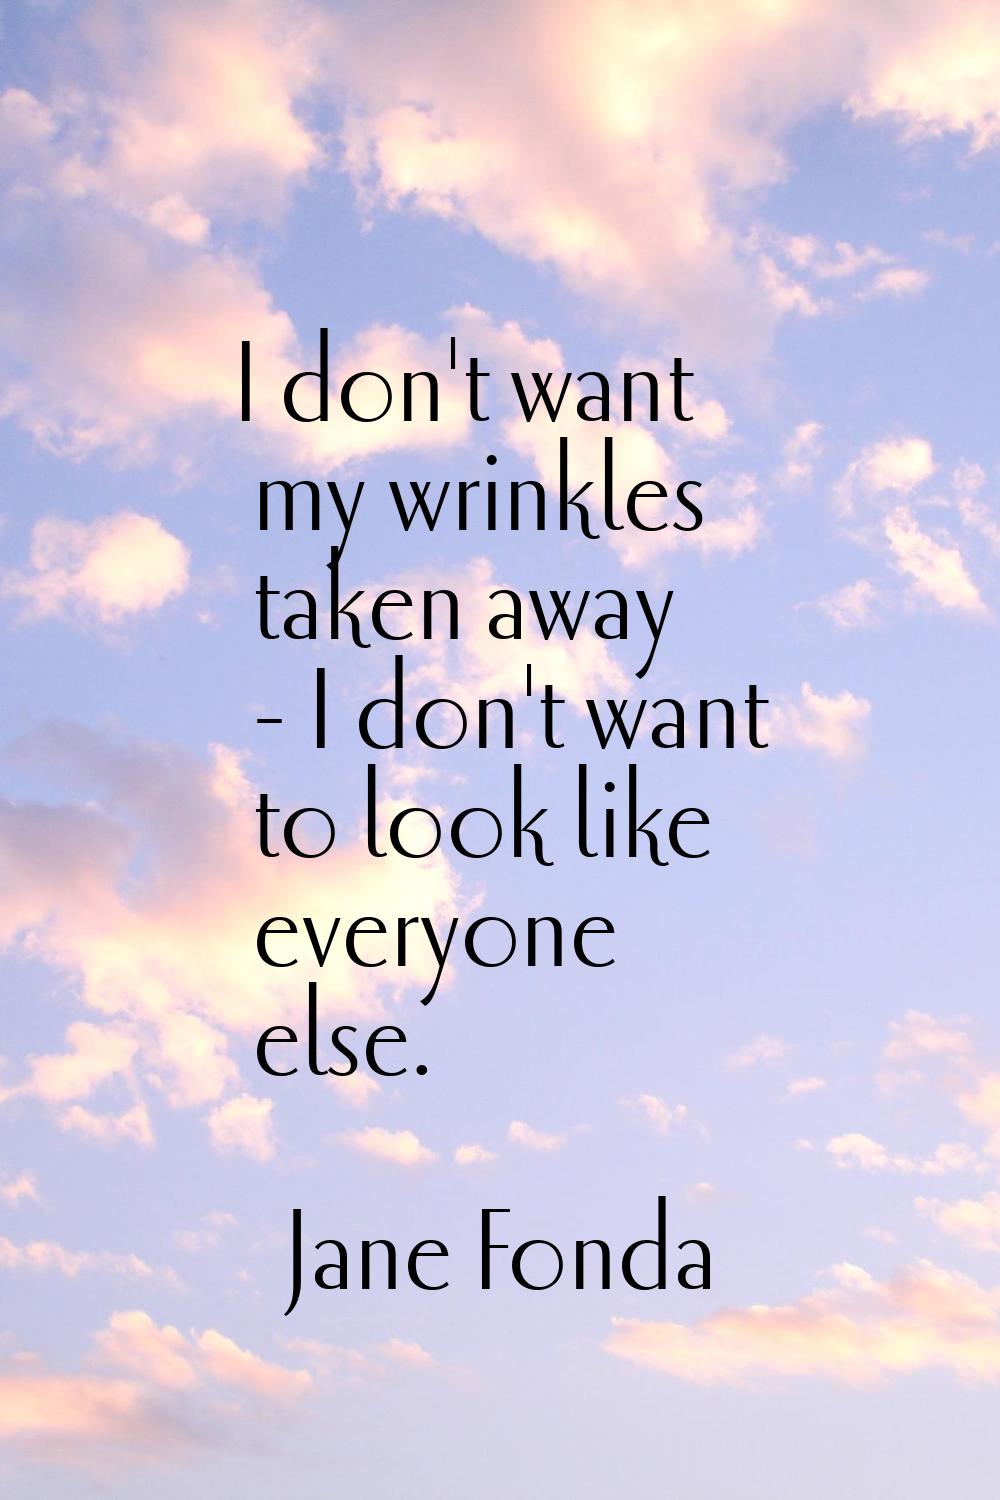 I don't want my wrinkles taken away - I don't want to look like everyone else.